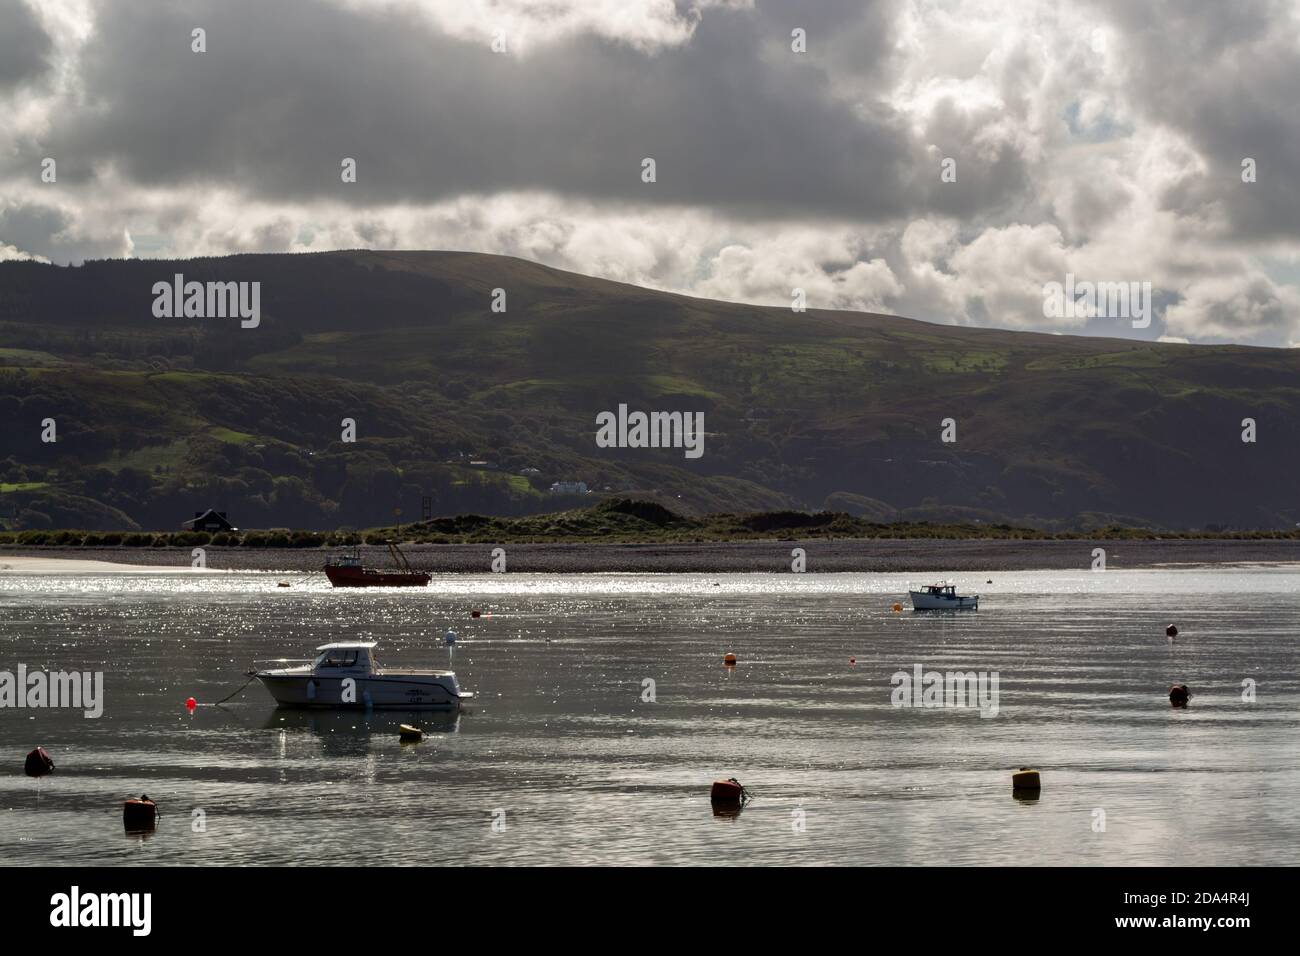 BARMOUTH, WALES - October 1st, 2020: boats in the Estuary of the river Mawddach,  Barmouth at high tide, Wales, County of Gwynedd on a cloudy autumn a Stock Photo